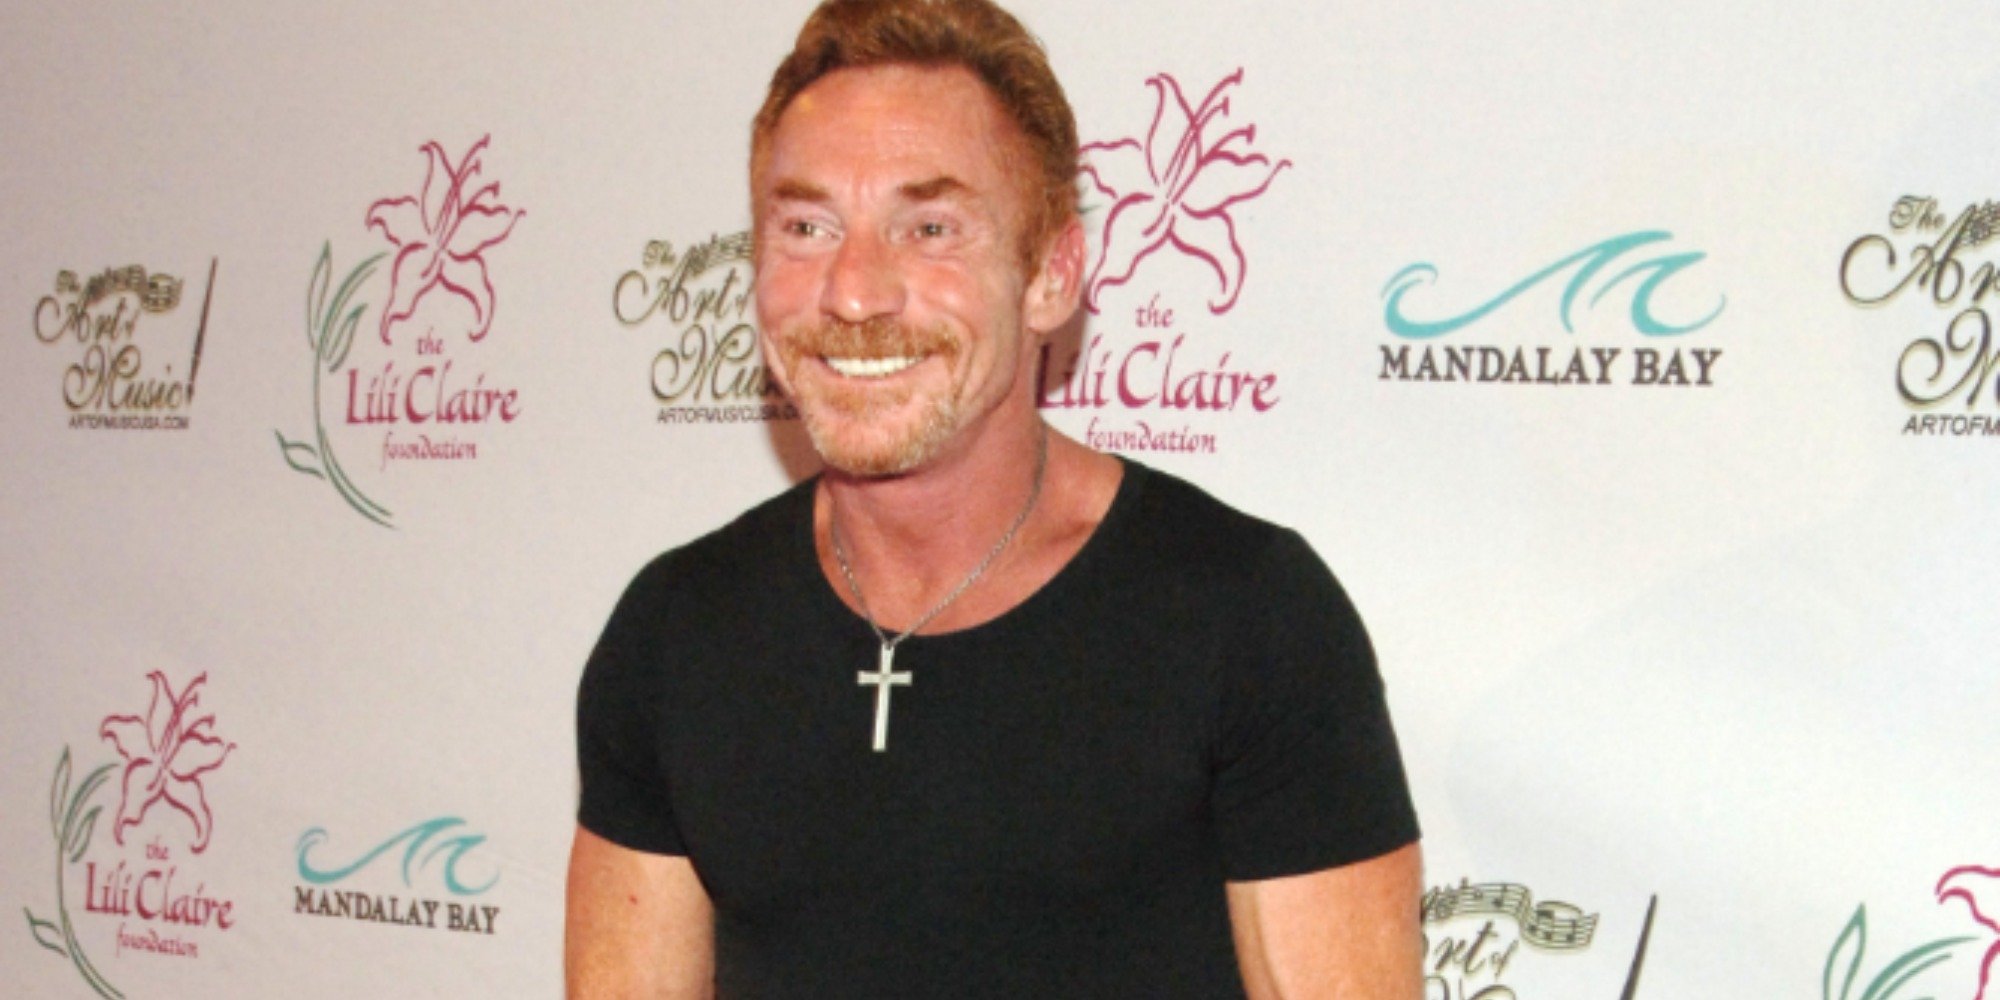 Danny Bonaduce, who recently announced his illness, smiling and wearing a black shirt on the red carpet at a press event in 2007.